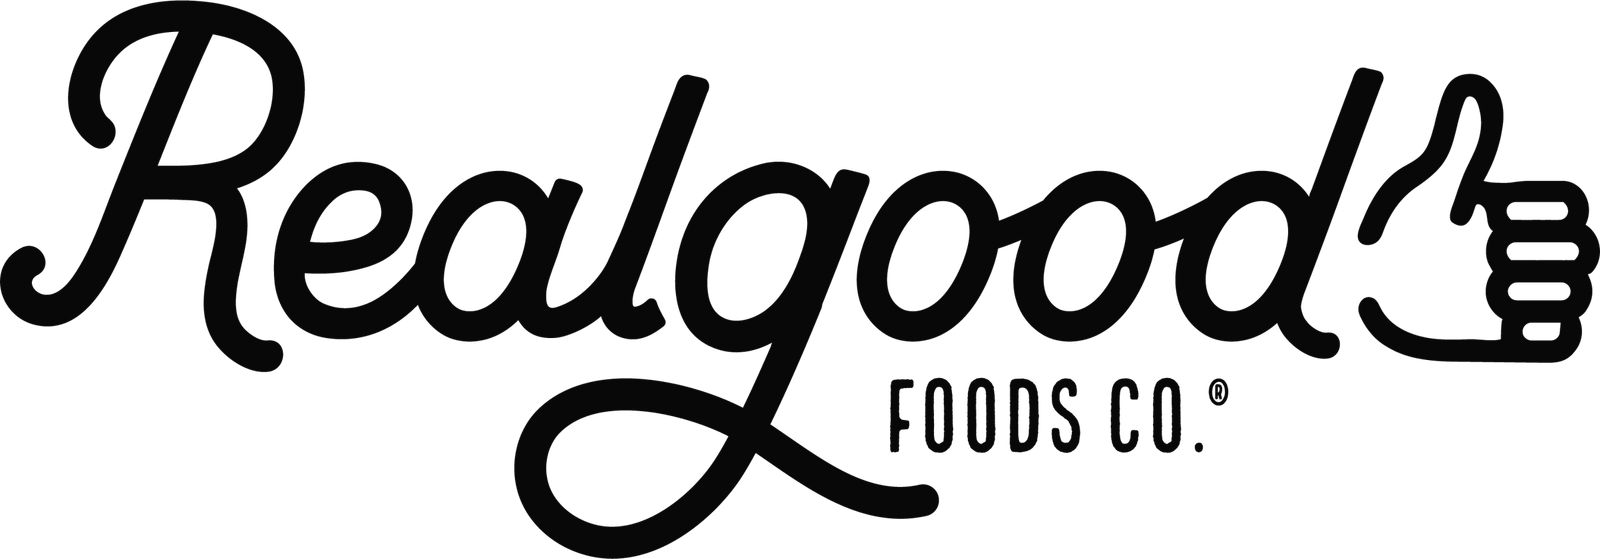 The Real Good Food appoints Tim Zimmer as CEO and Mark Dietz as Senior VP